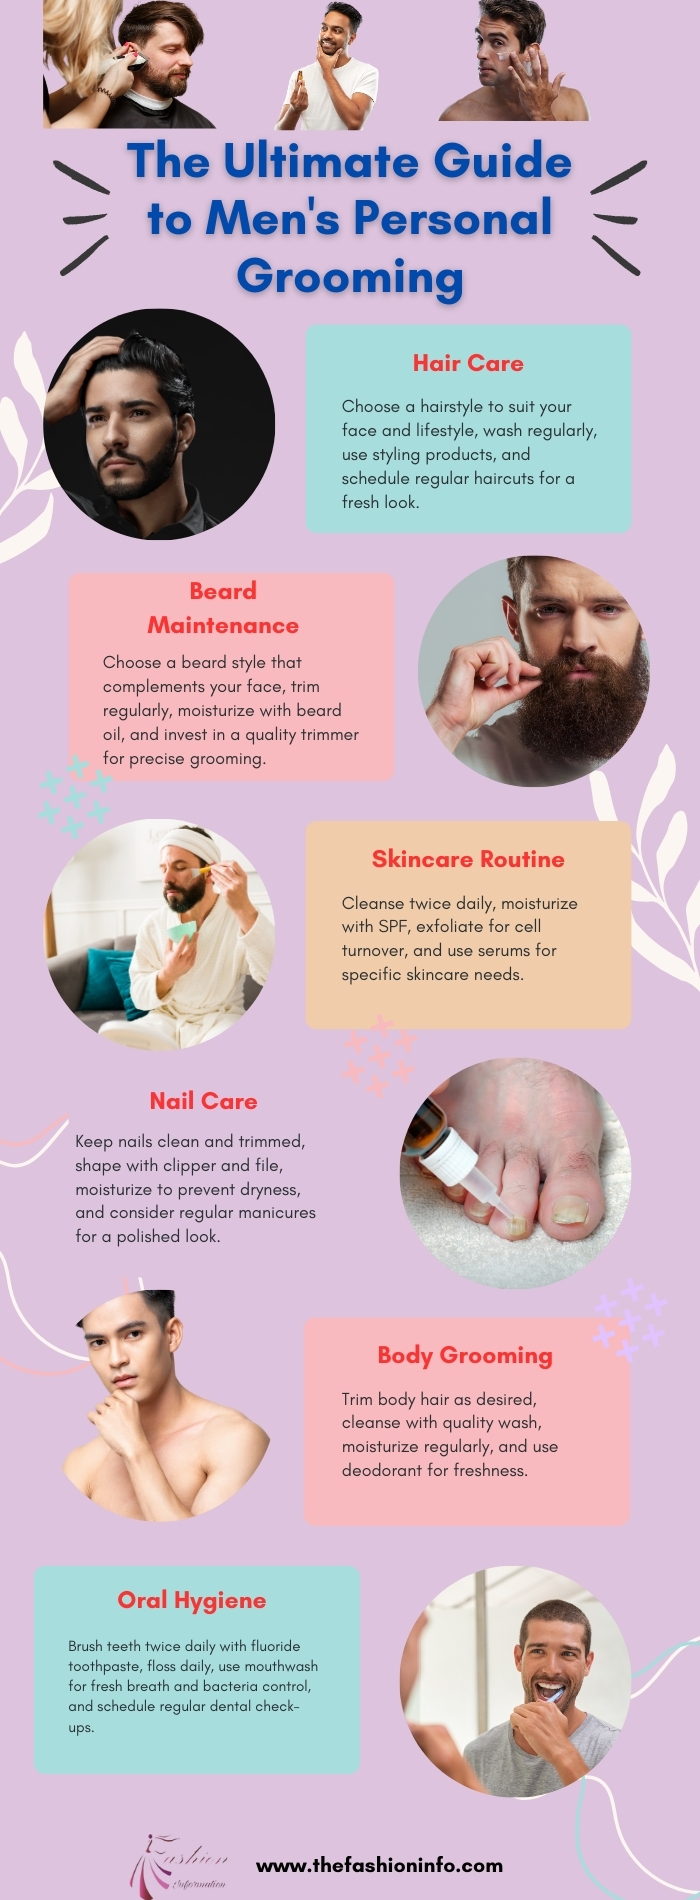 The Ultimate Guide to Men's Personal Grooming